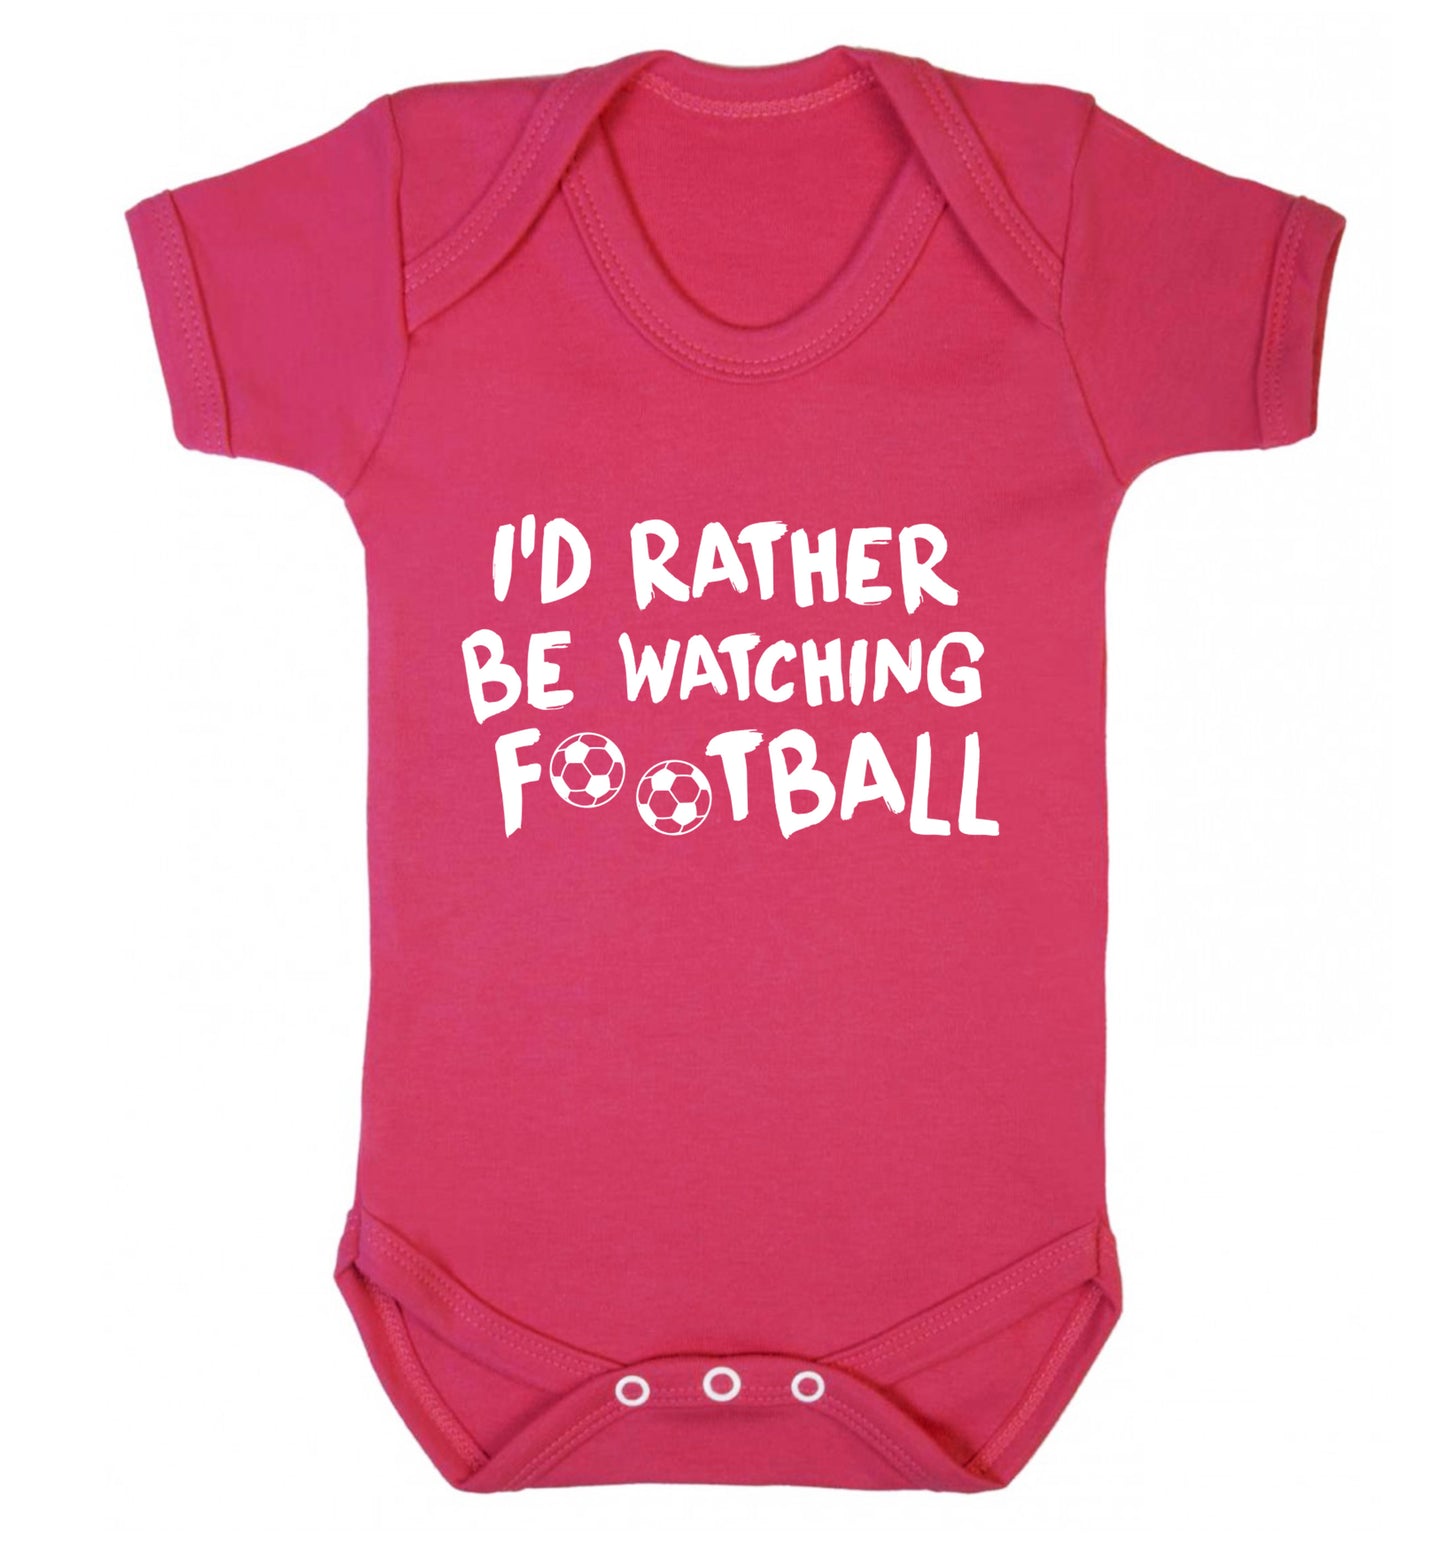 I'd rather be watching football Baby Vest dark pink 18-24 months